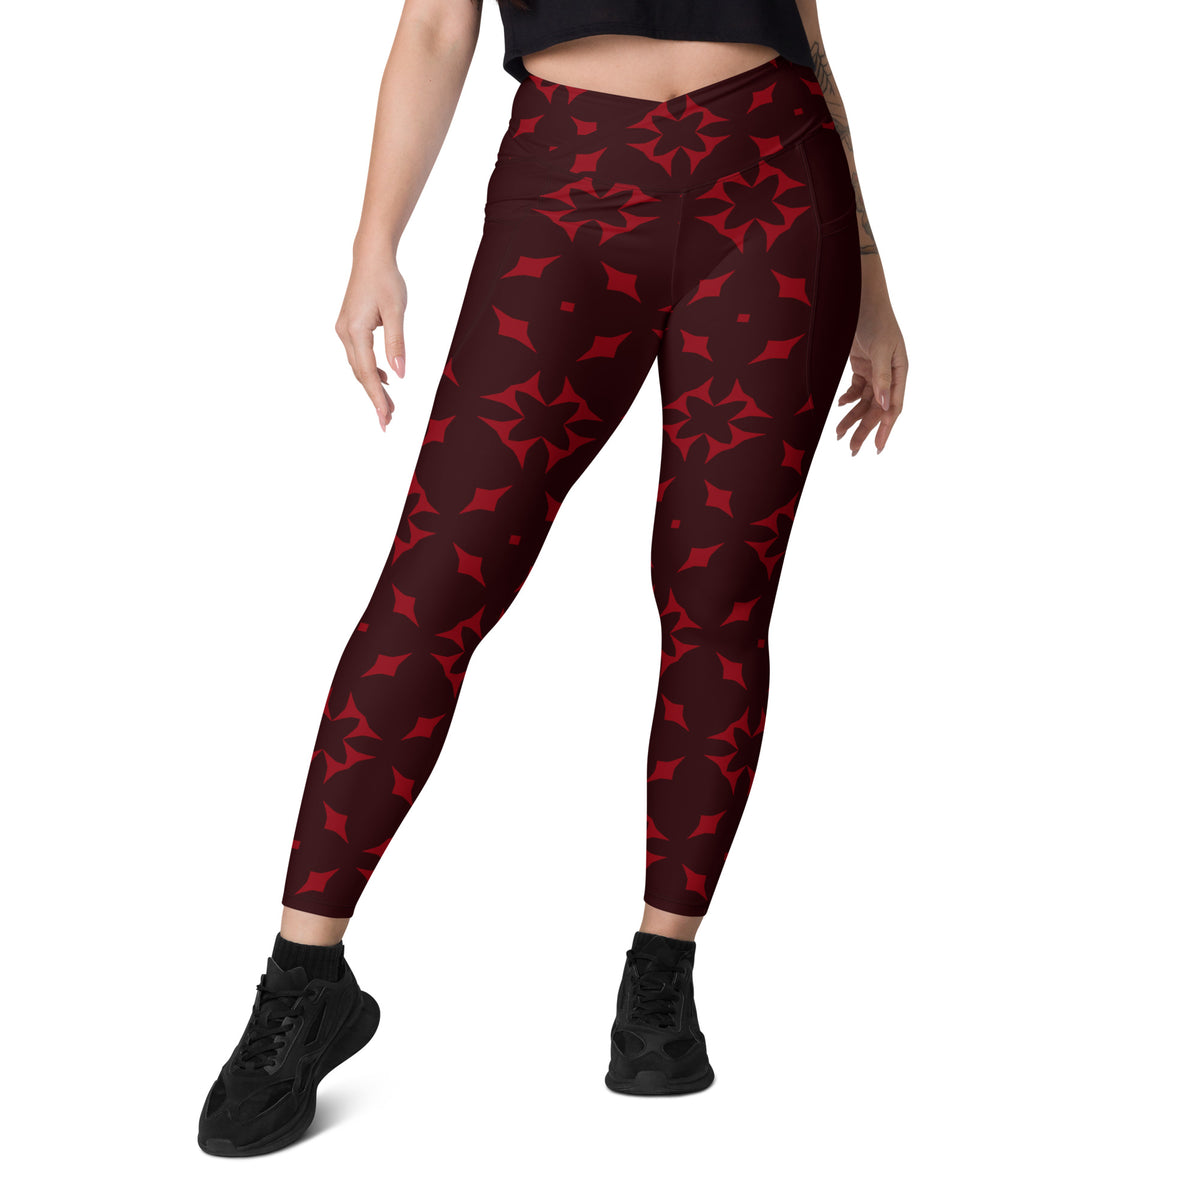 Striped Serenade leggings with crossover waistband and side pockets.